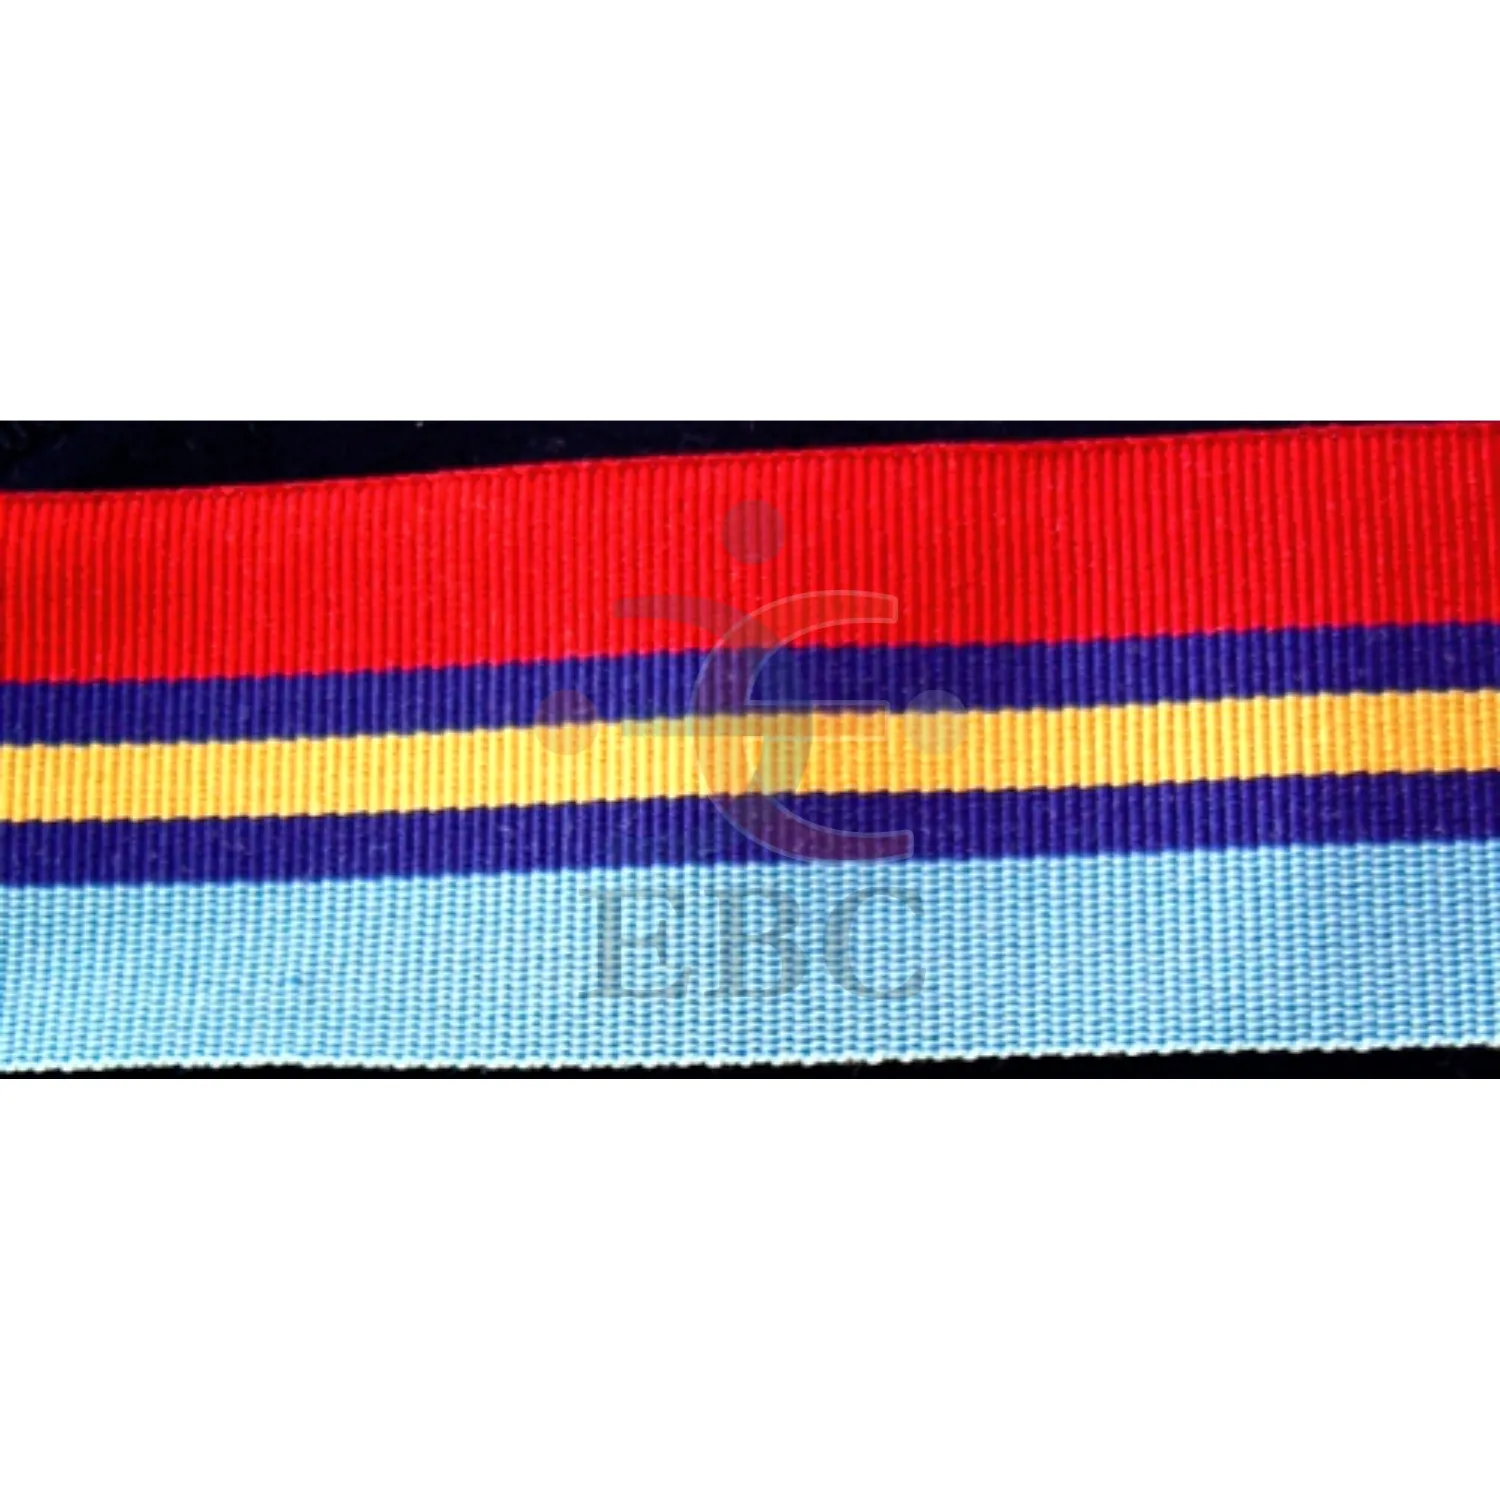 Customized Security Webbing Belt Tactical Striped Coloured Belt Manufactures Custom Designed Fabric Beaded Belts from Pakistan